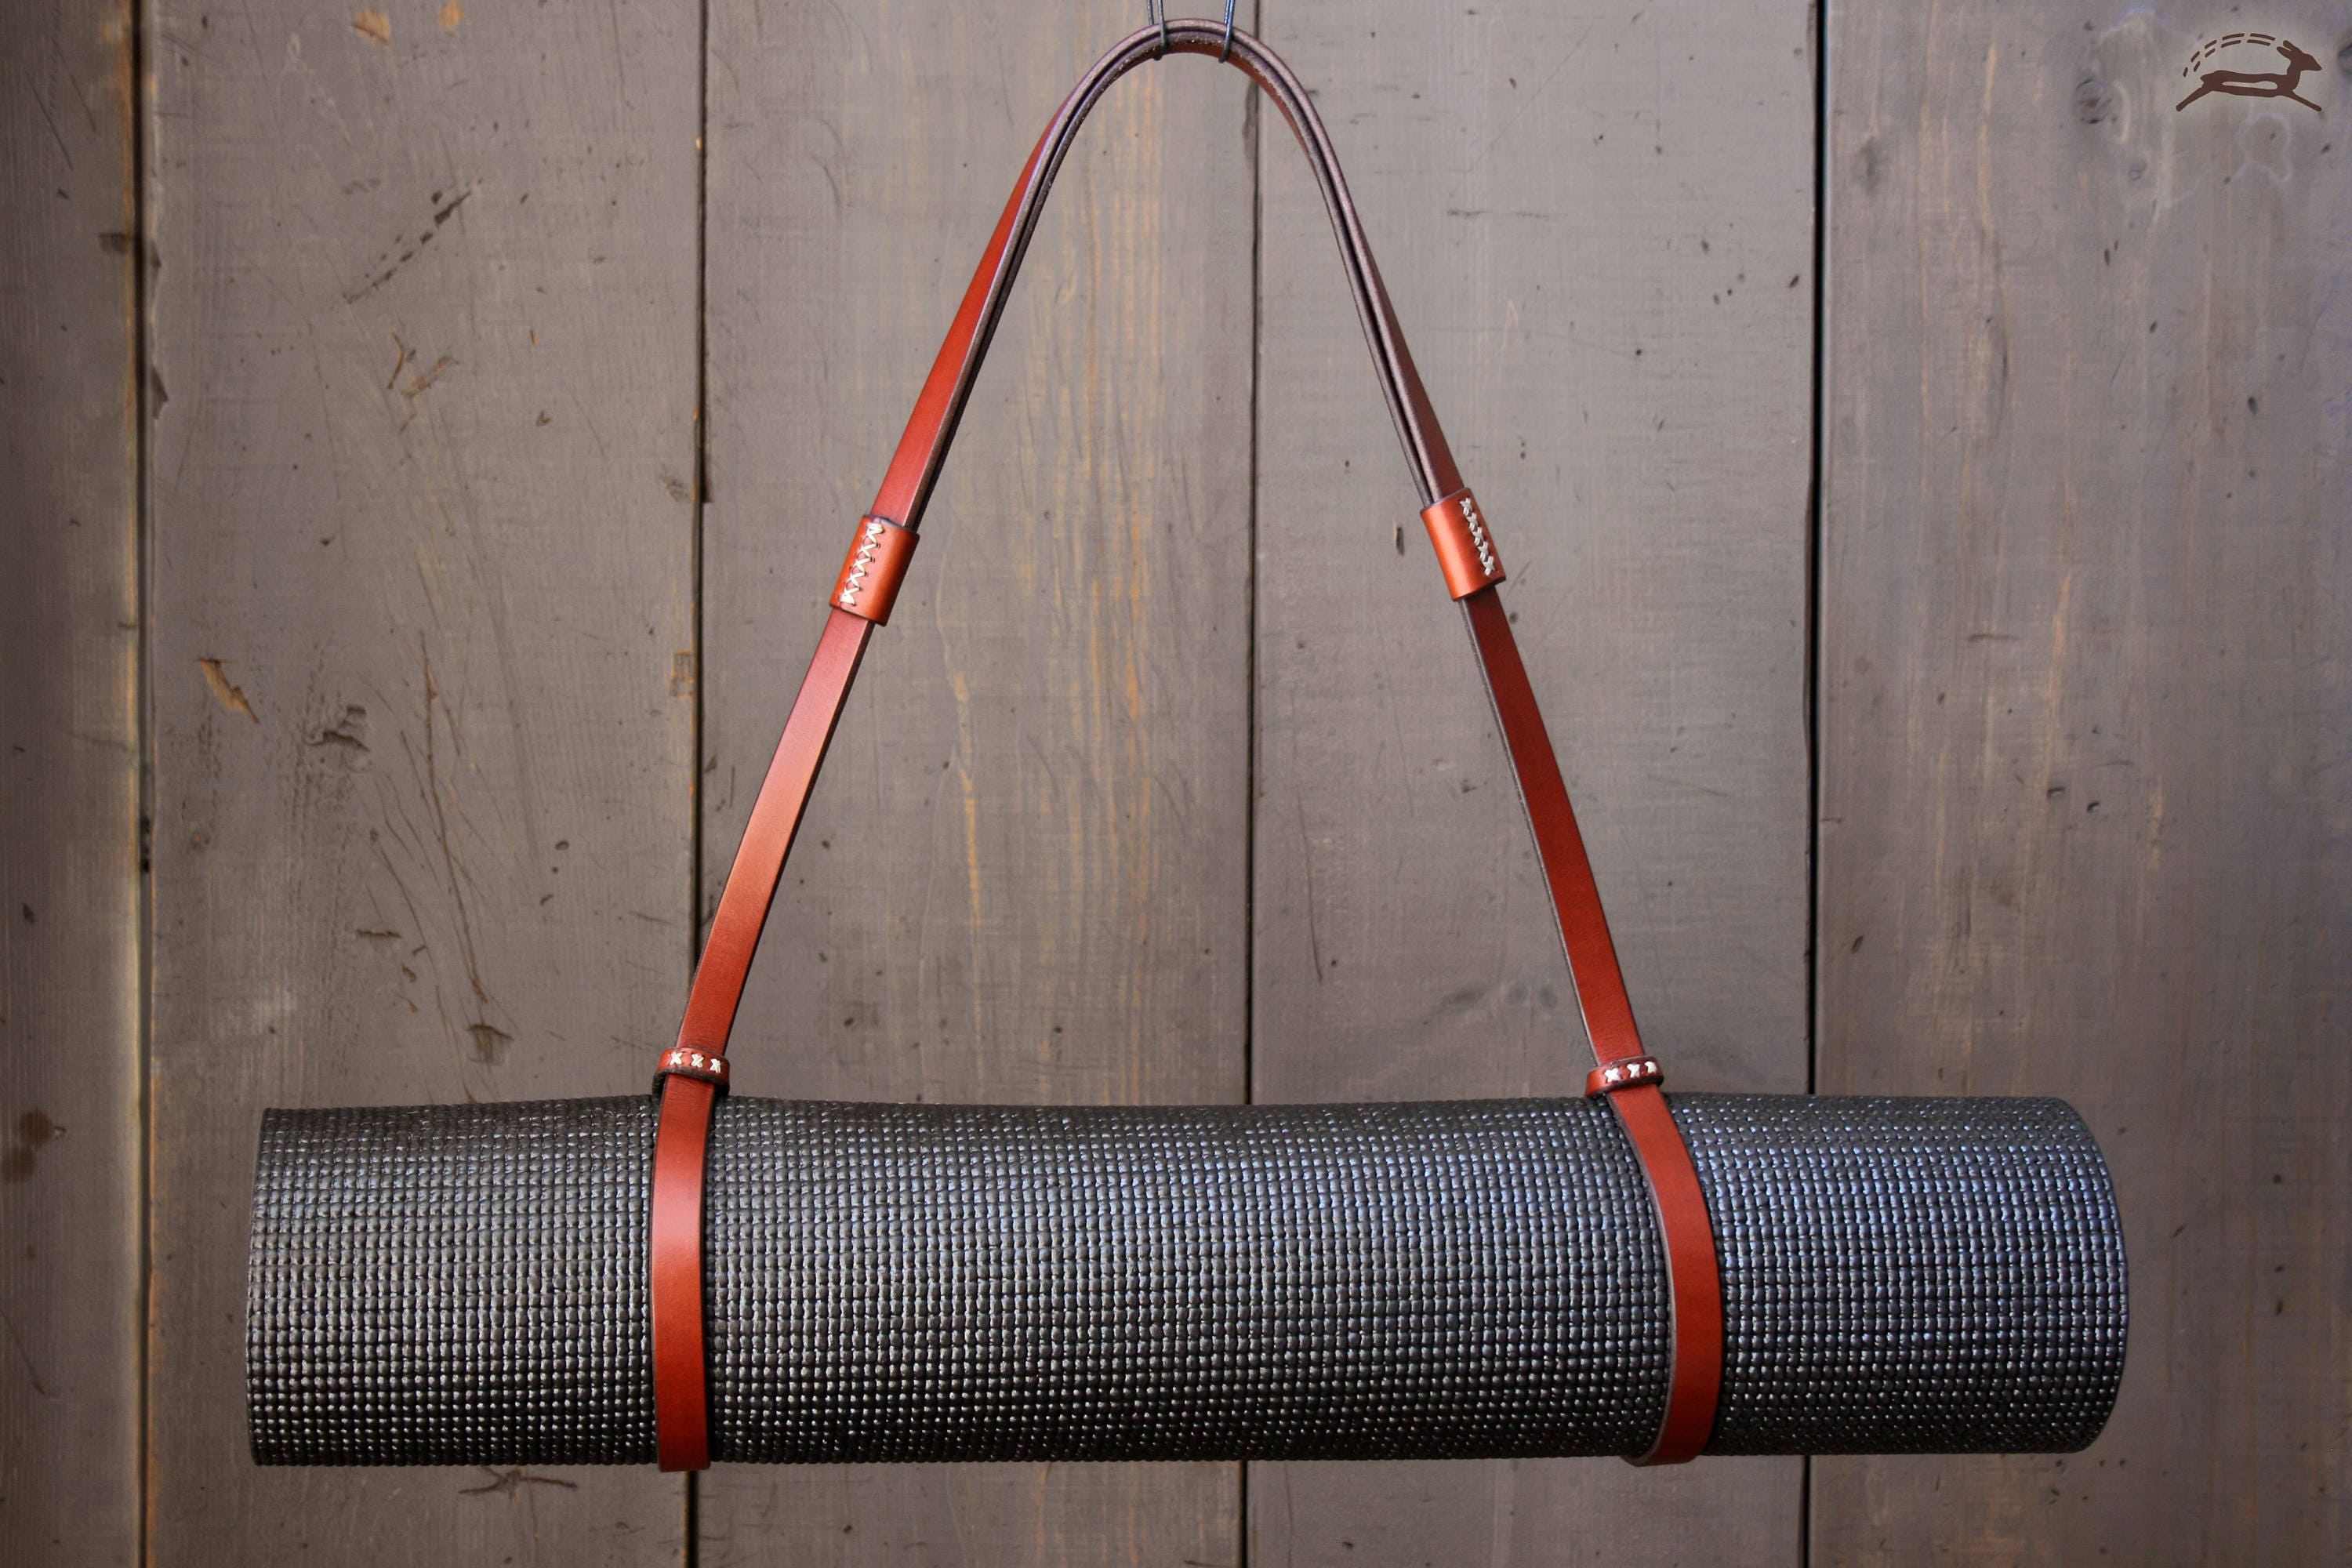 Strap for carrying the ReYoga ReCarry yoga mat